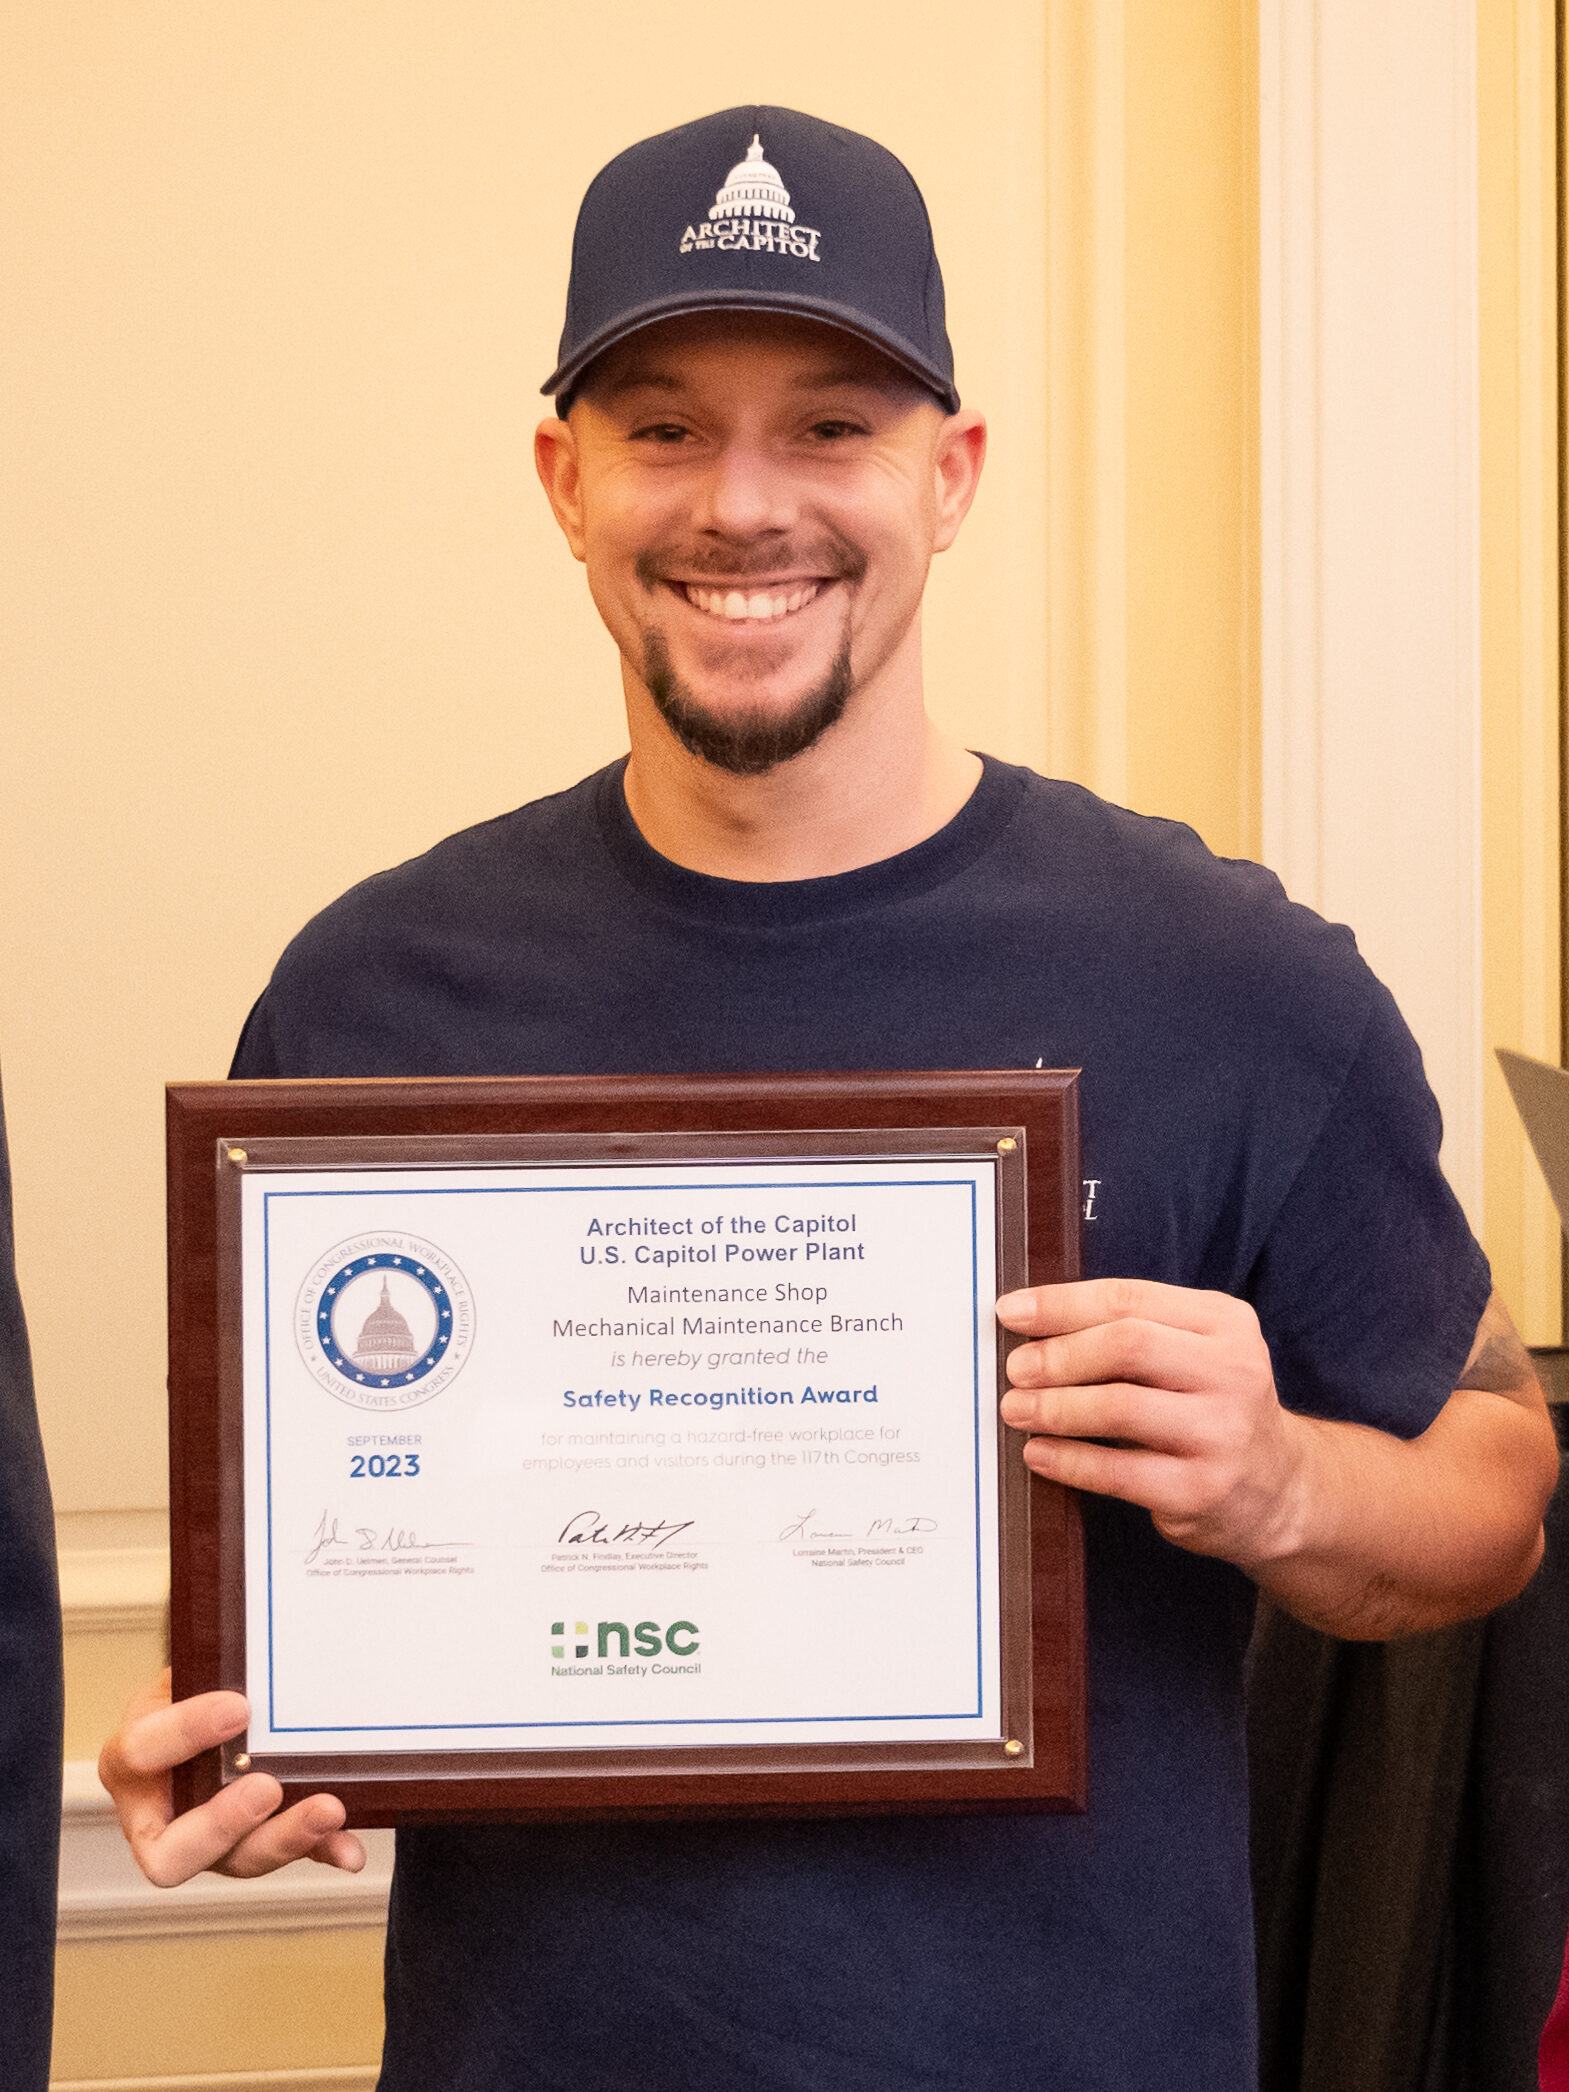 Man wearing a baseball cap with the Architect of the Capitol logo smiles holding a framed certificate